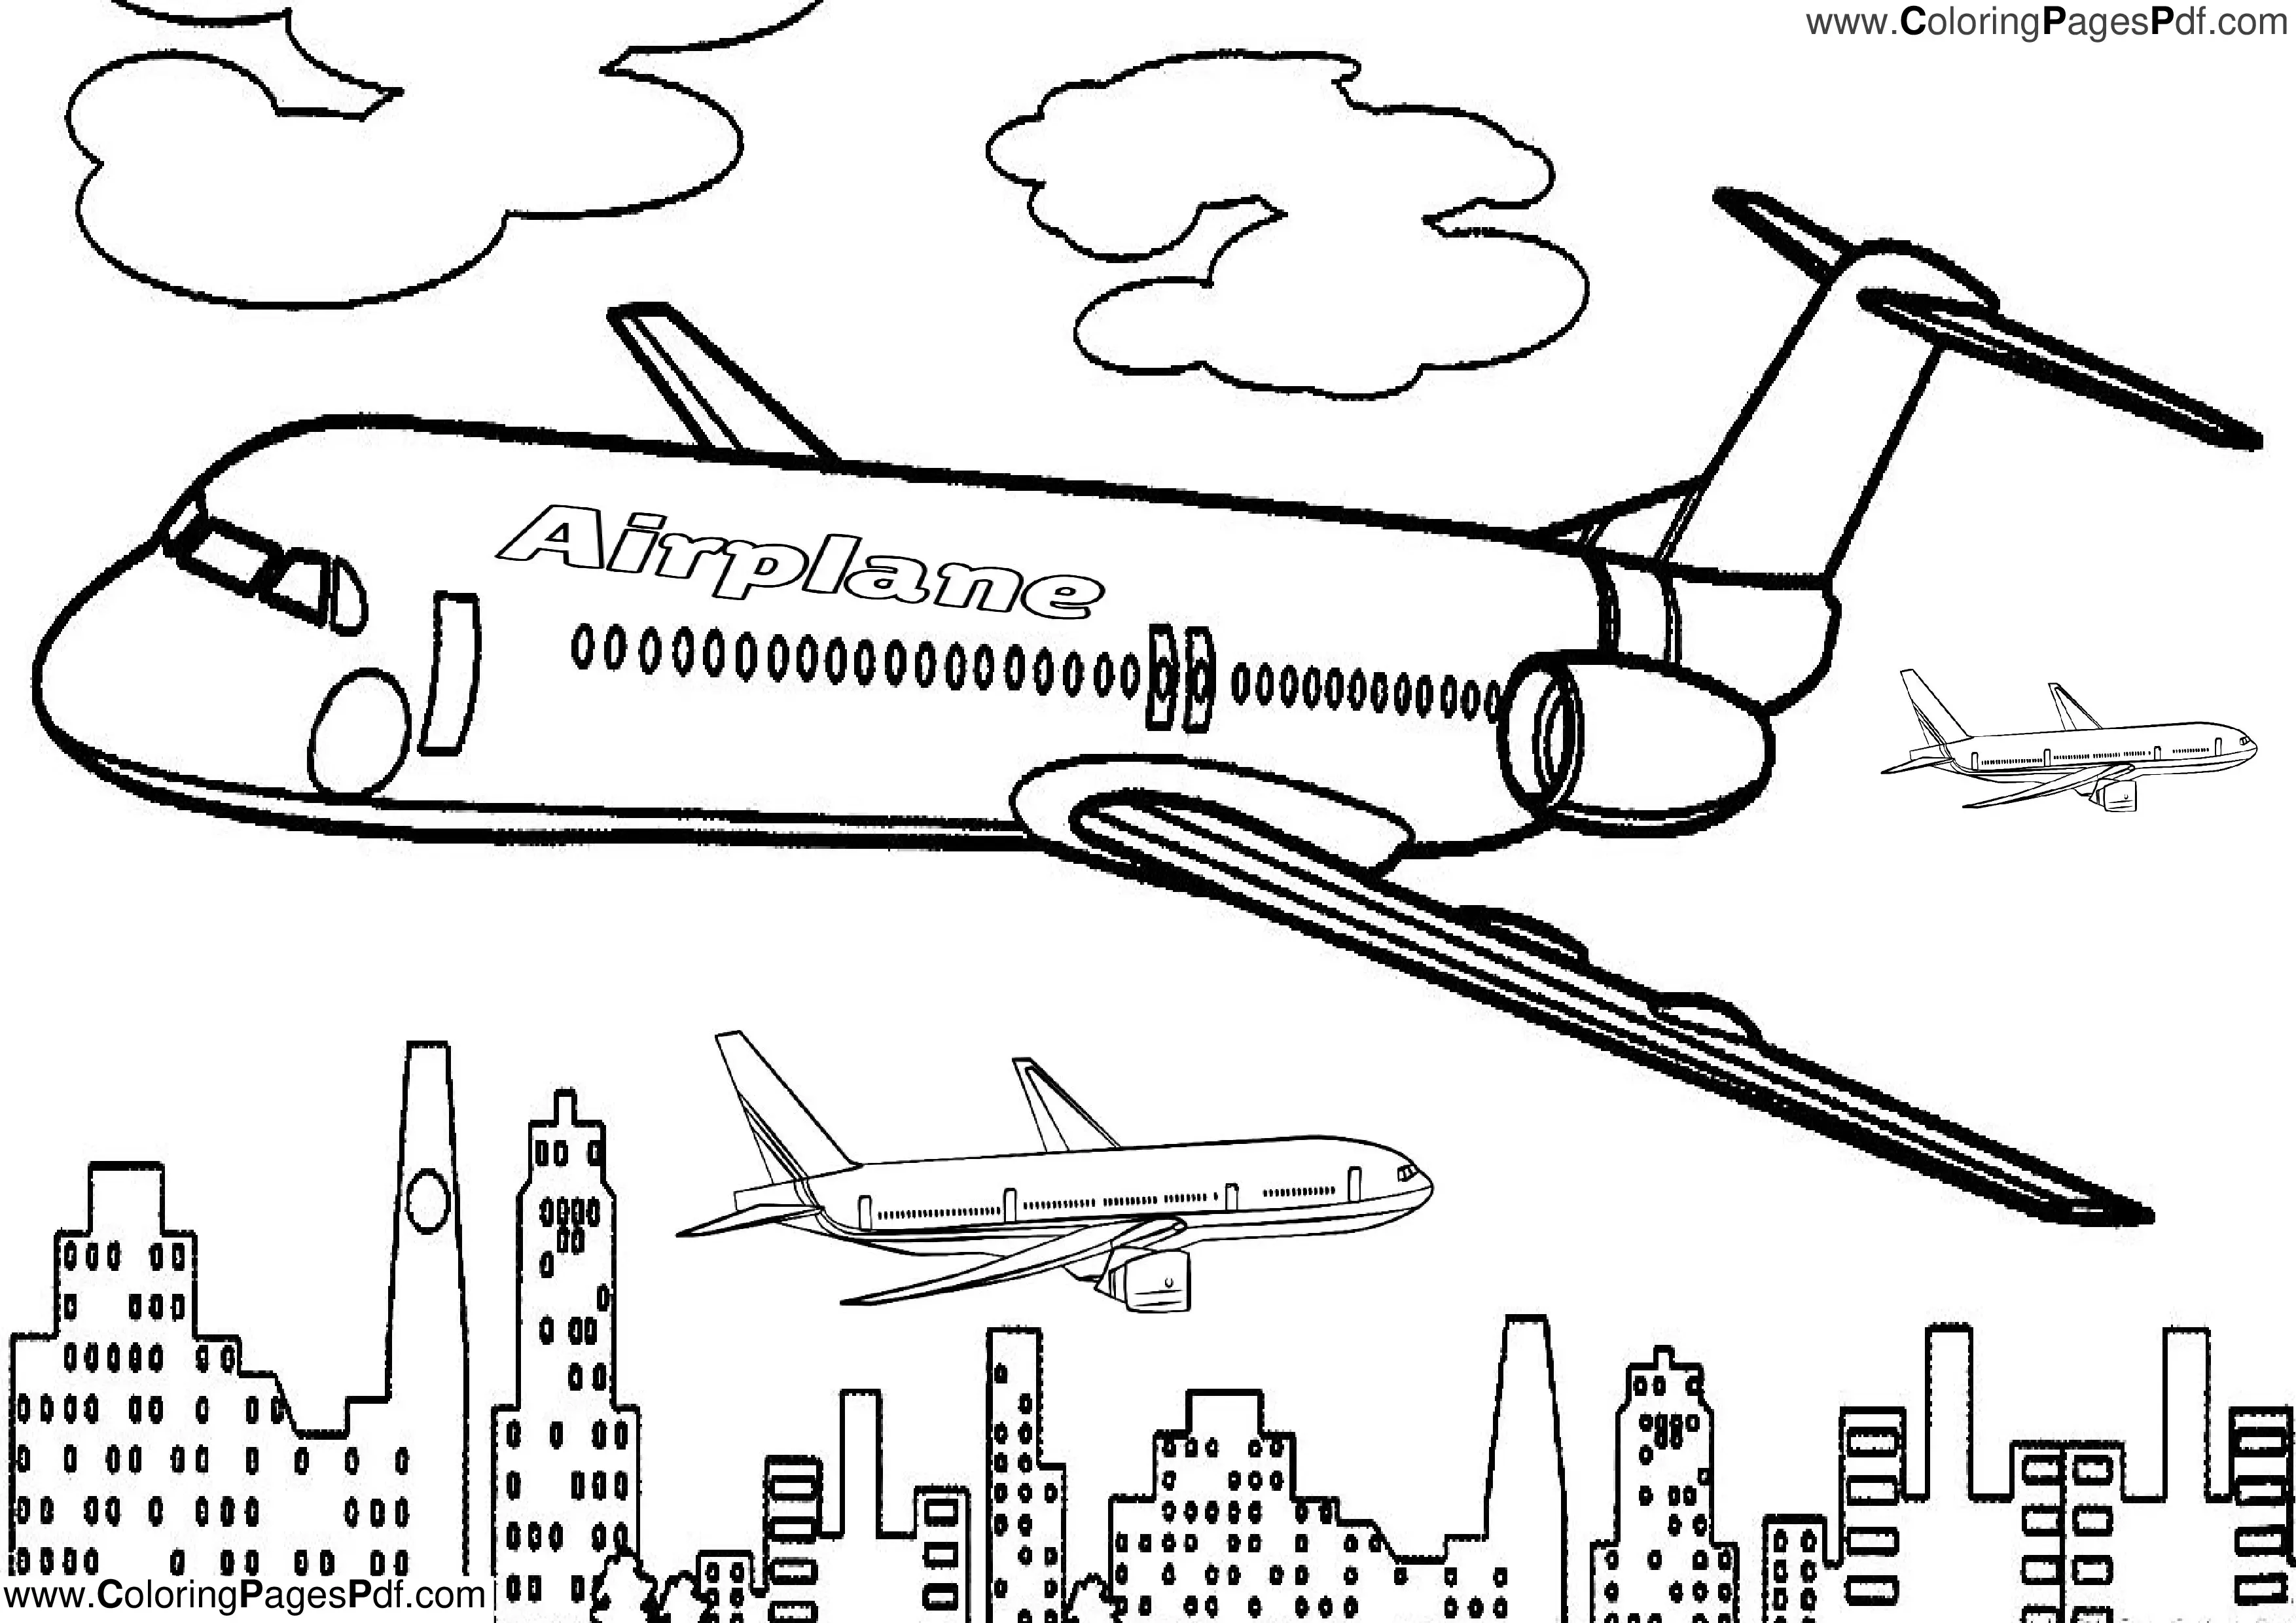 Airplane coloring pages pdf